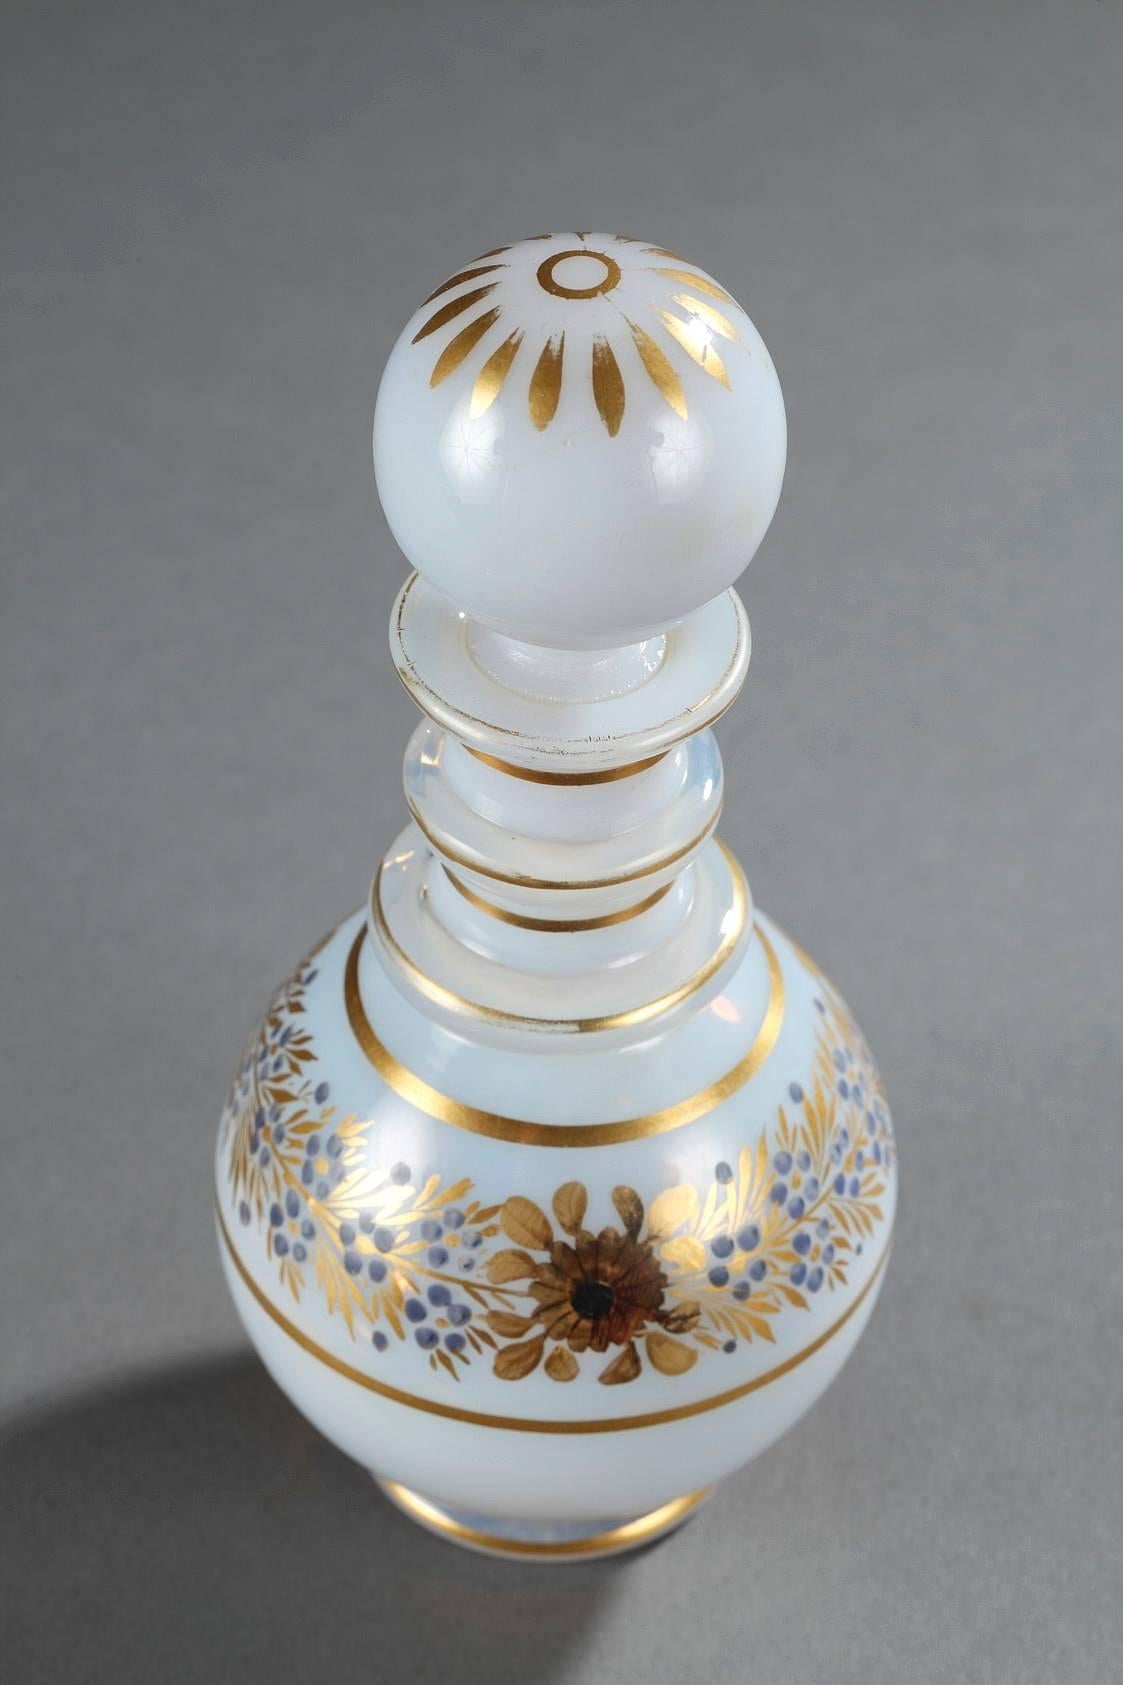 Small perfume bottle in white opaline with a ball-shaped stopper. Golden stripes, gold, and a dark blue wreath of roses, anemones, and forget-me-nots decorate the rim of the paunch. The top of the stopper is highlighted with petals. The decoration